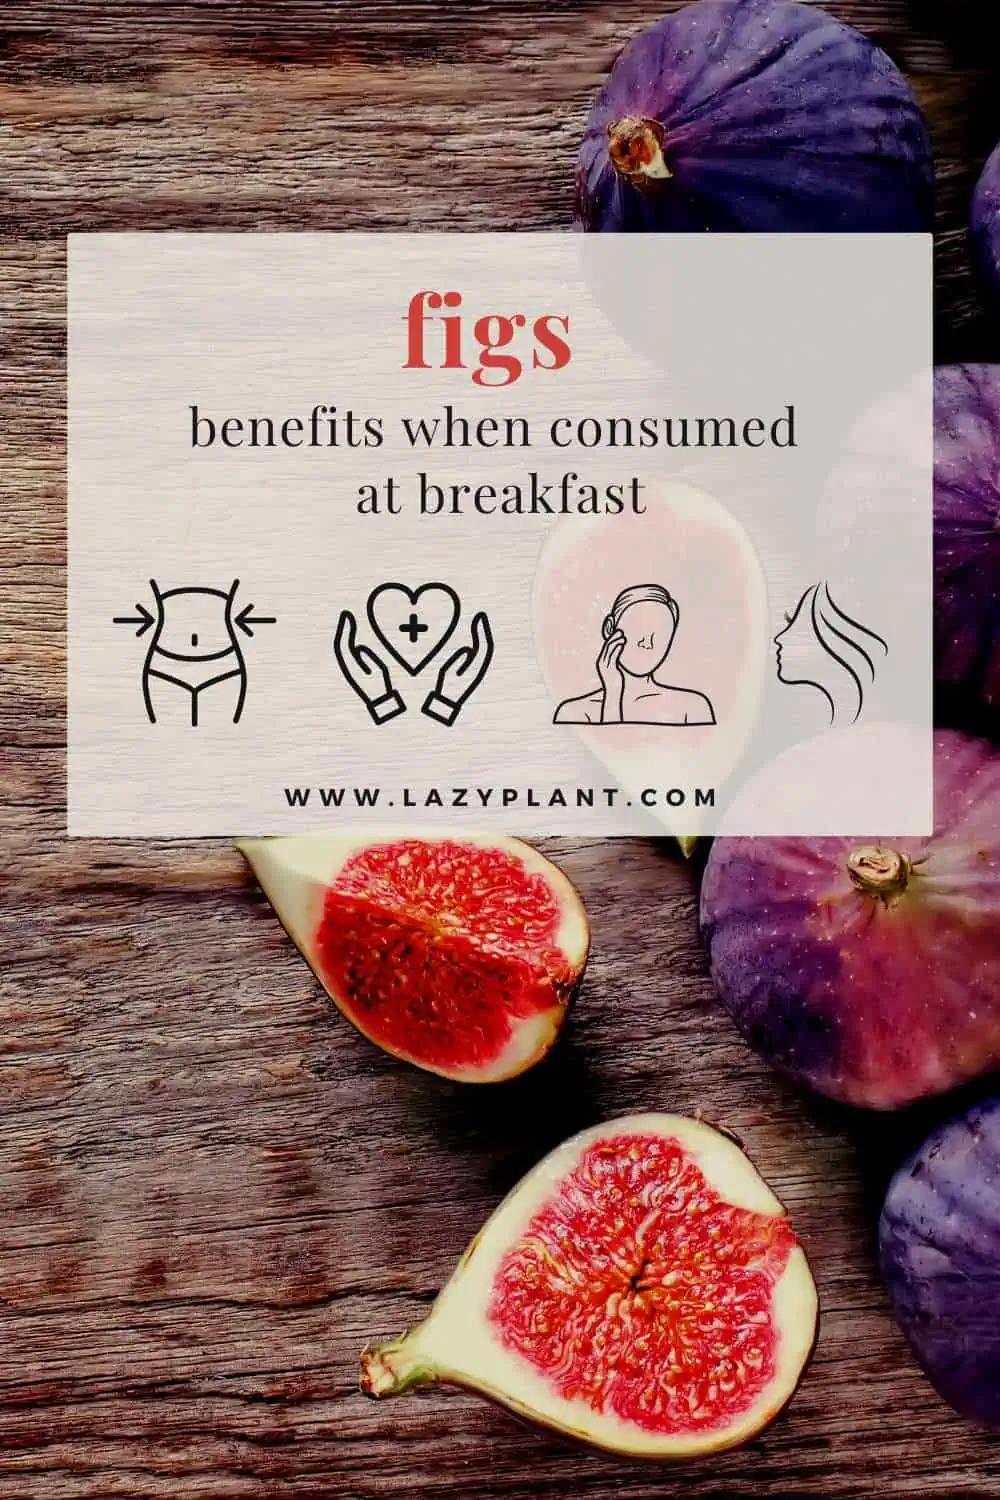 Figs are a superfood with many health benefits. Incorporating them into our daily eating habits is easy. They're so many healthy recipes with figs.